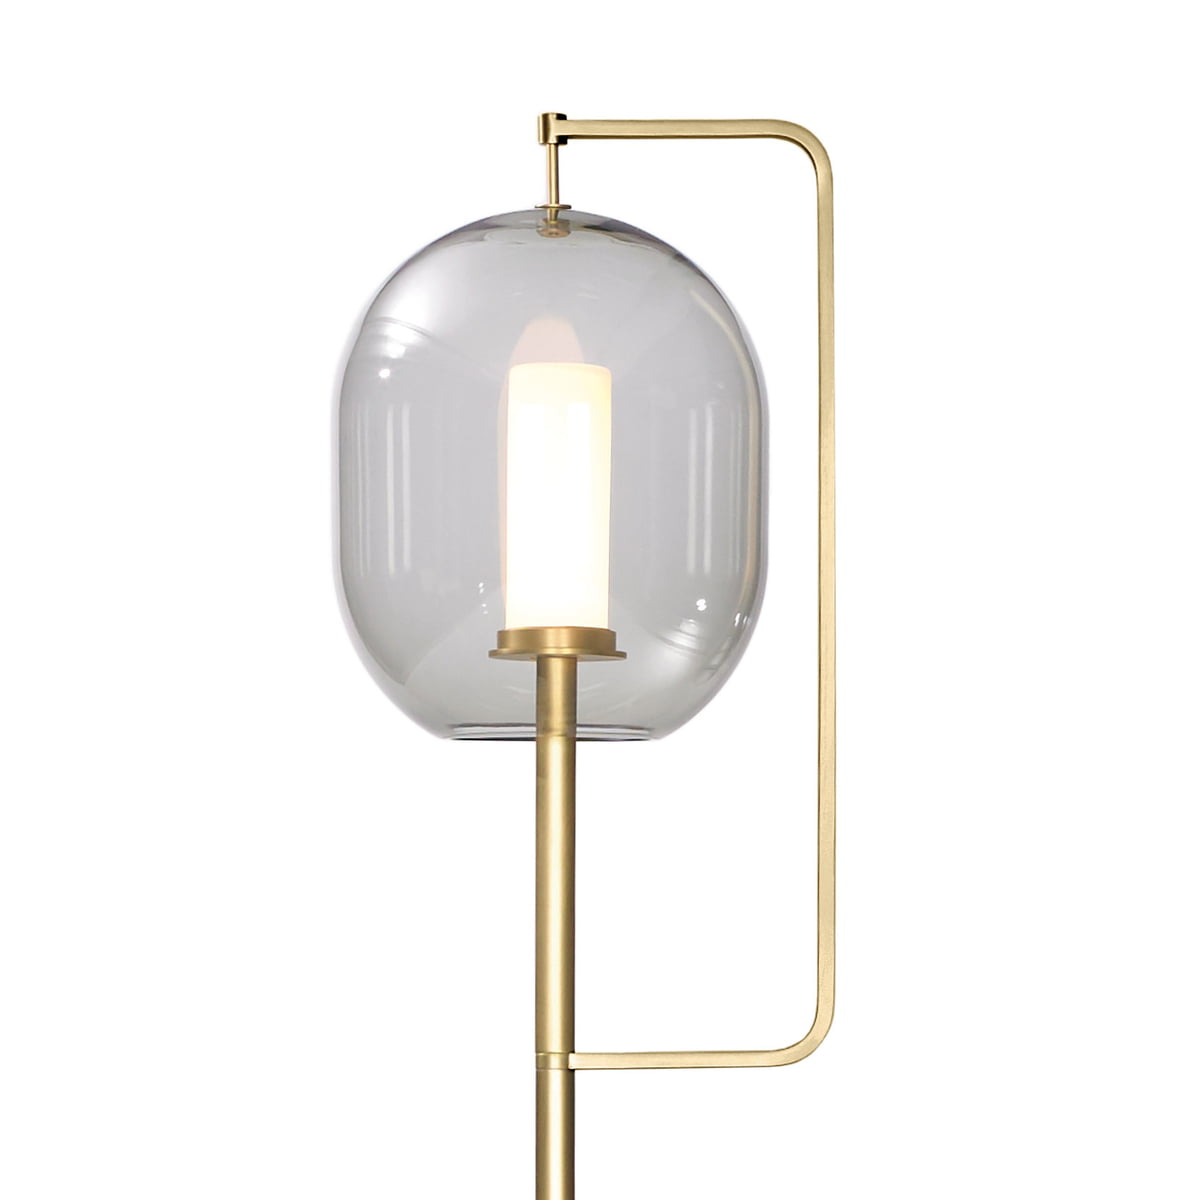 Classicon Lantern Light Floor Lamp H 135 Cm Brass throughout proportions 1200 X 1200